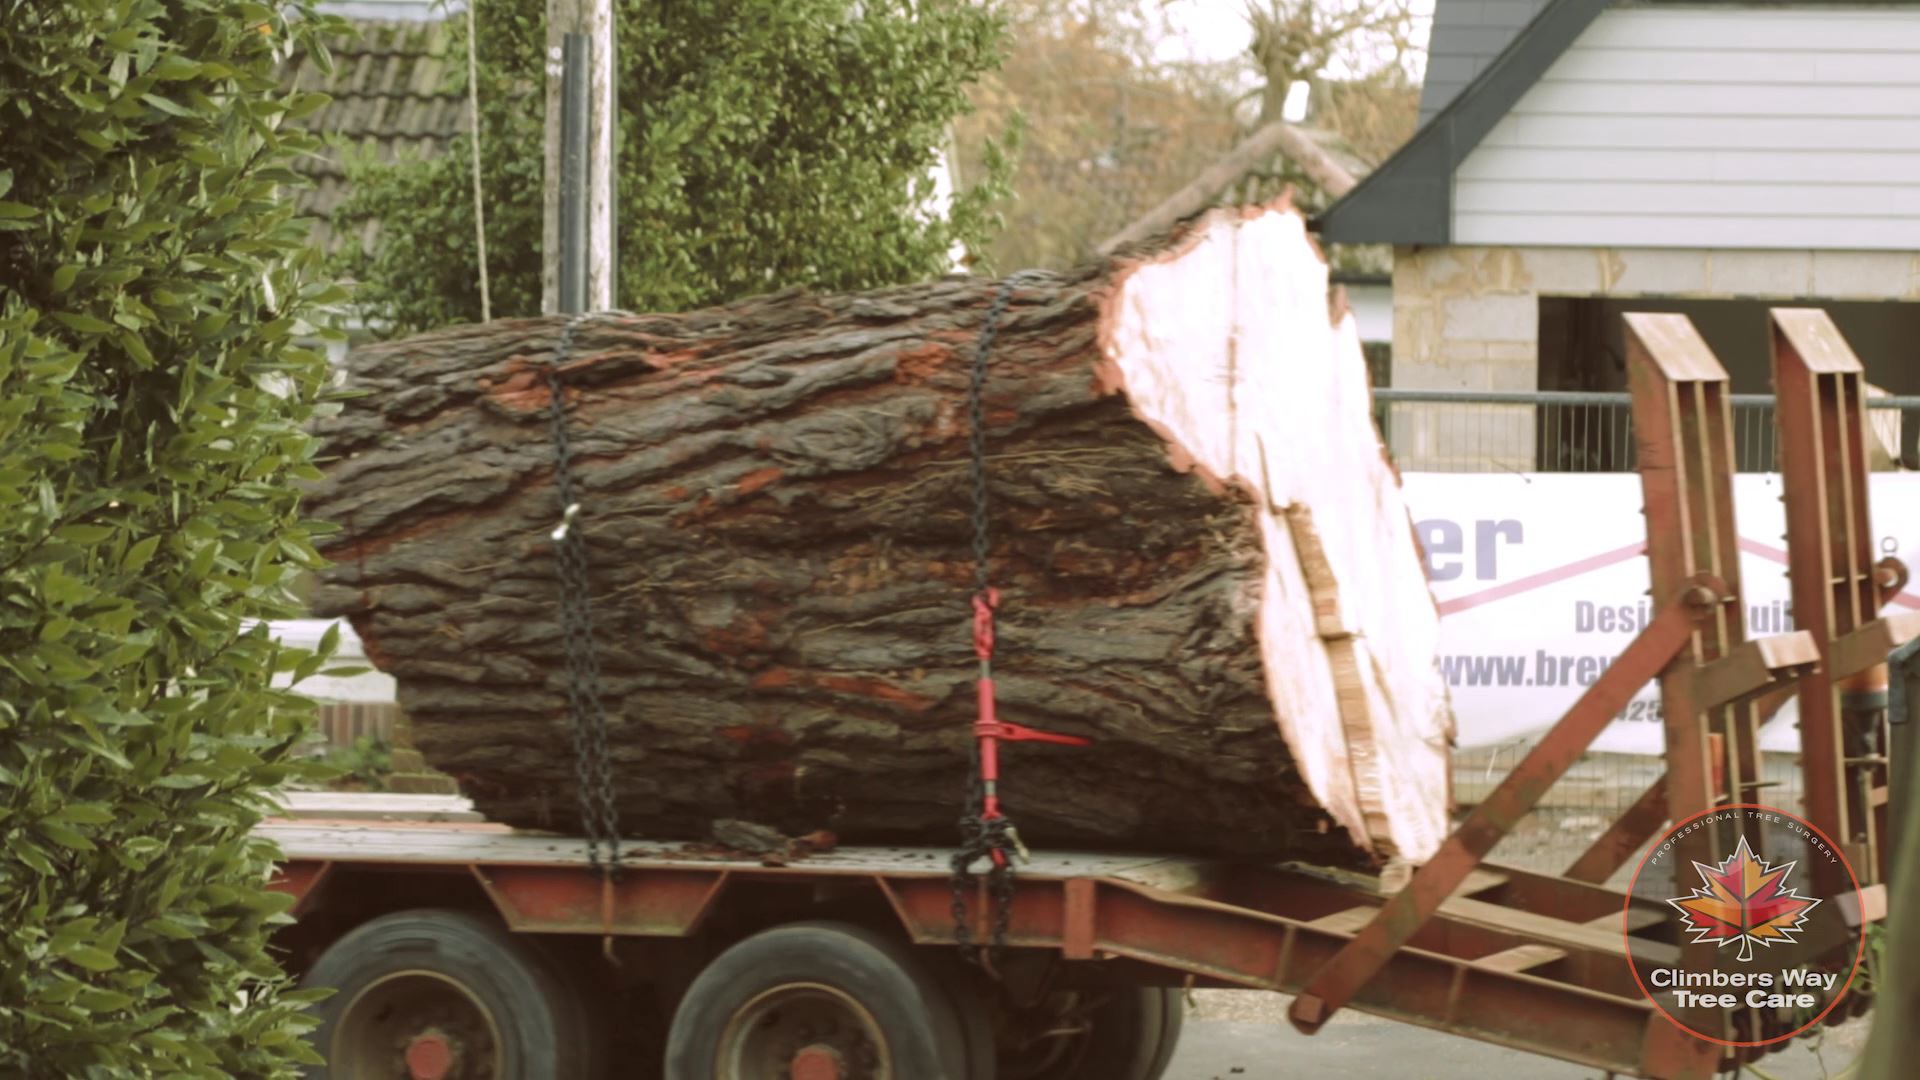 Timber carried away by trailer.